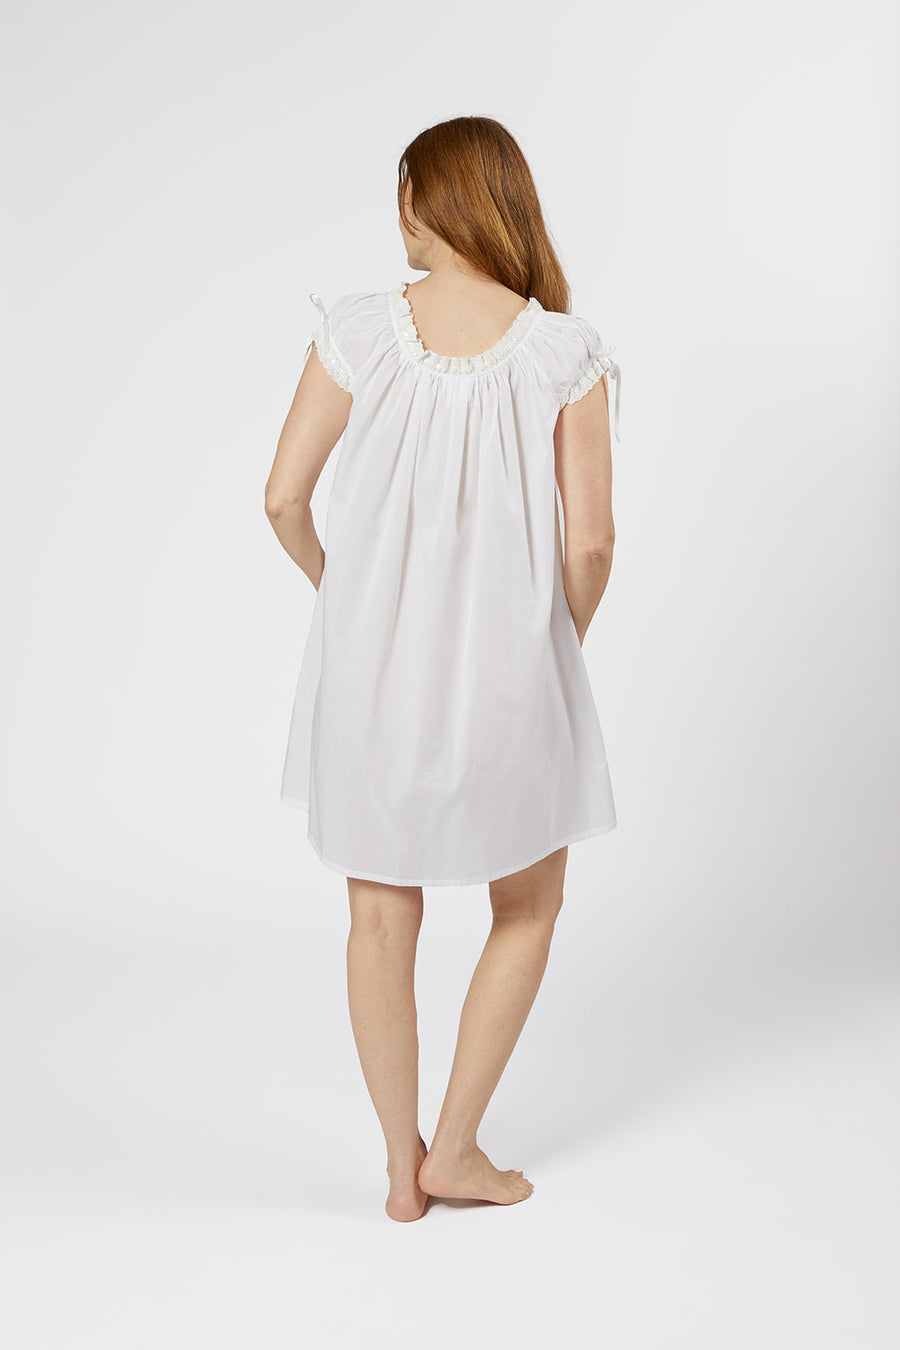 RUTHIE COTTON NIGHTGOWN